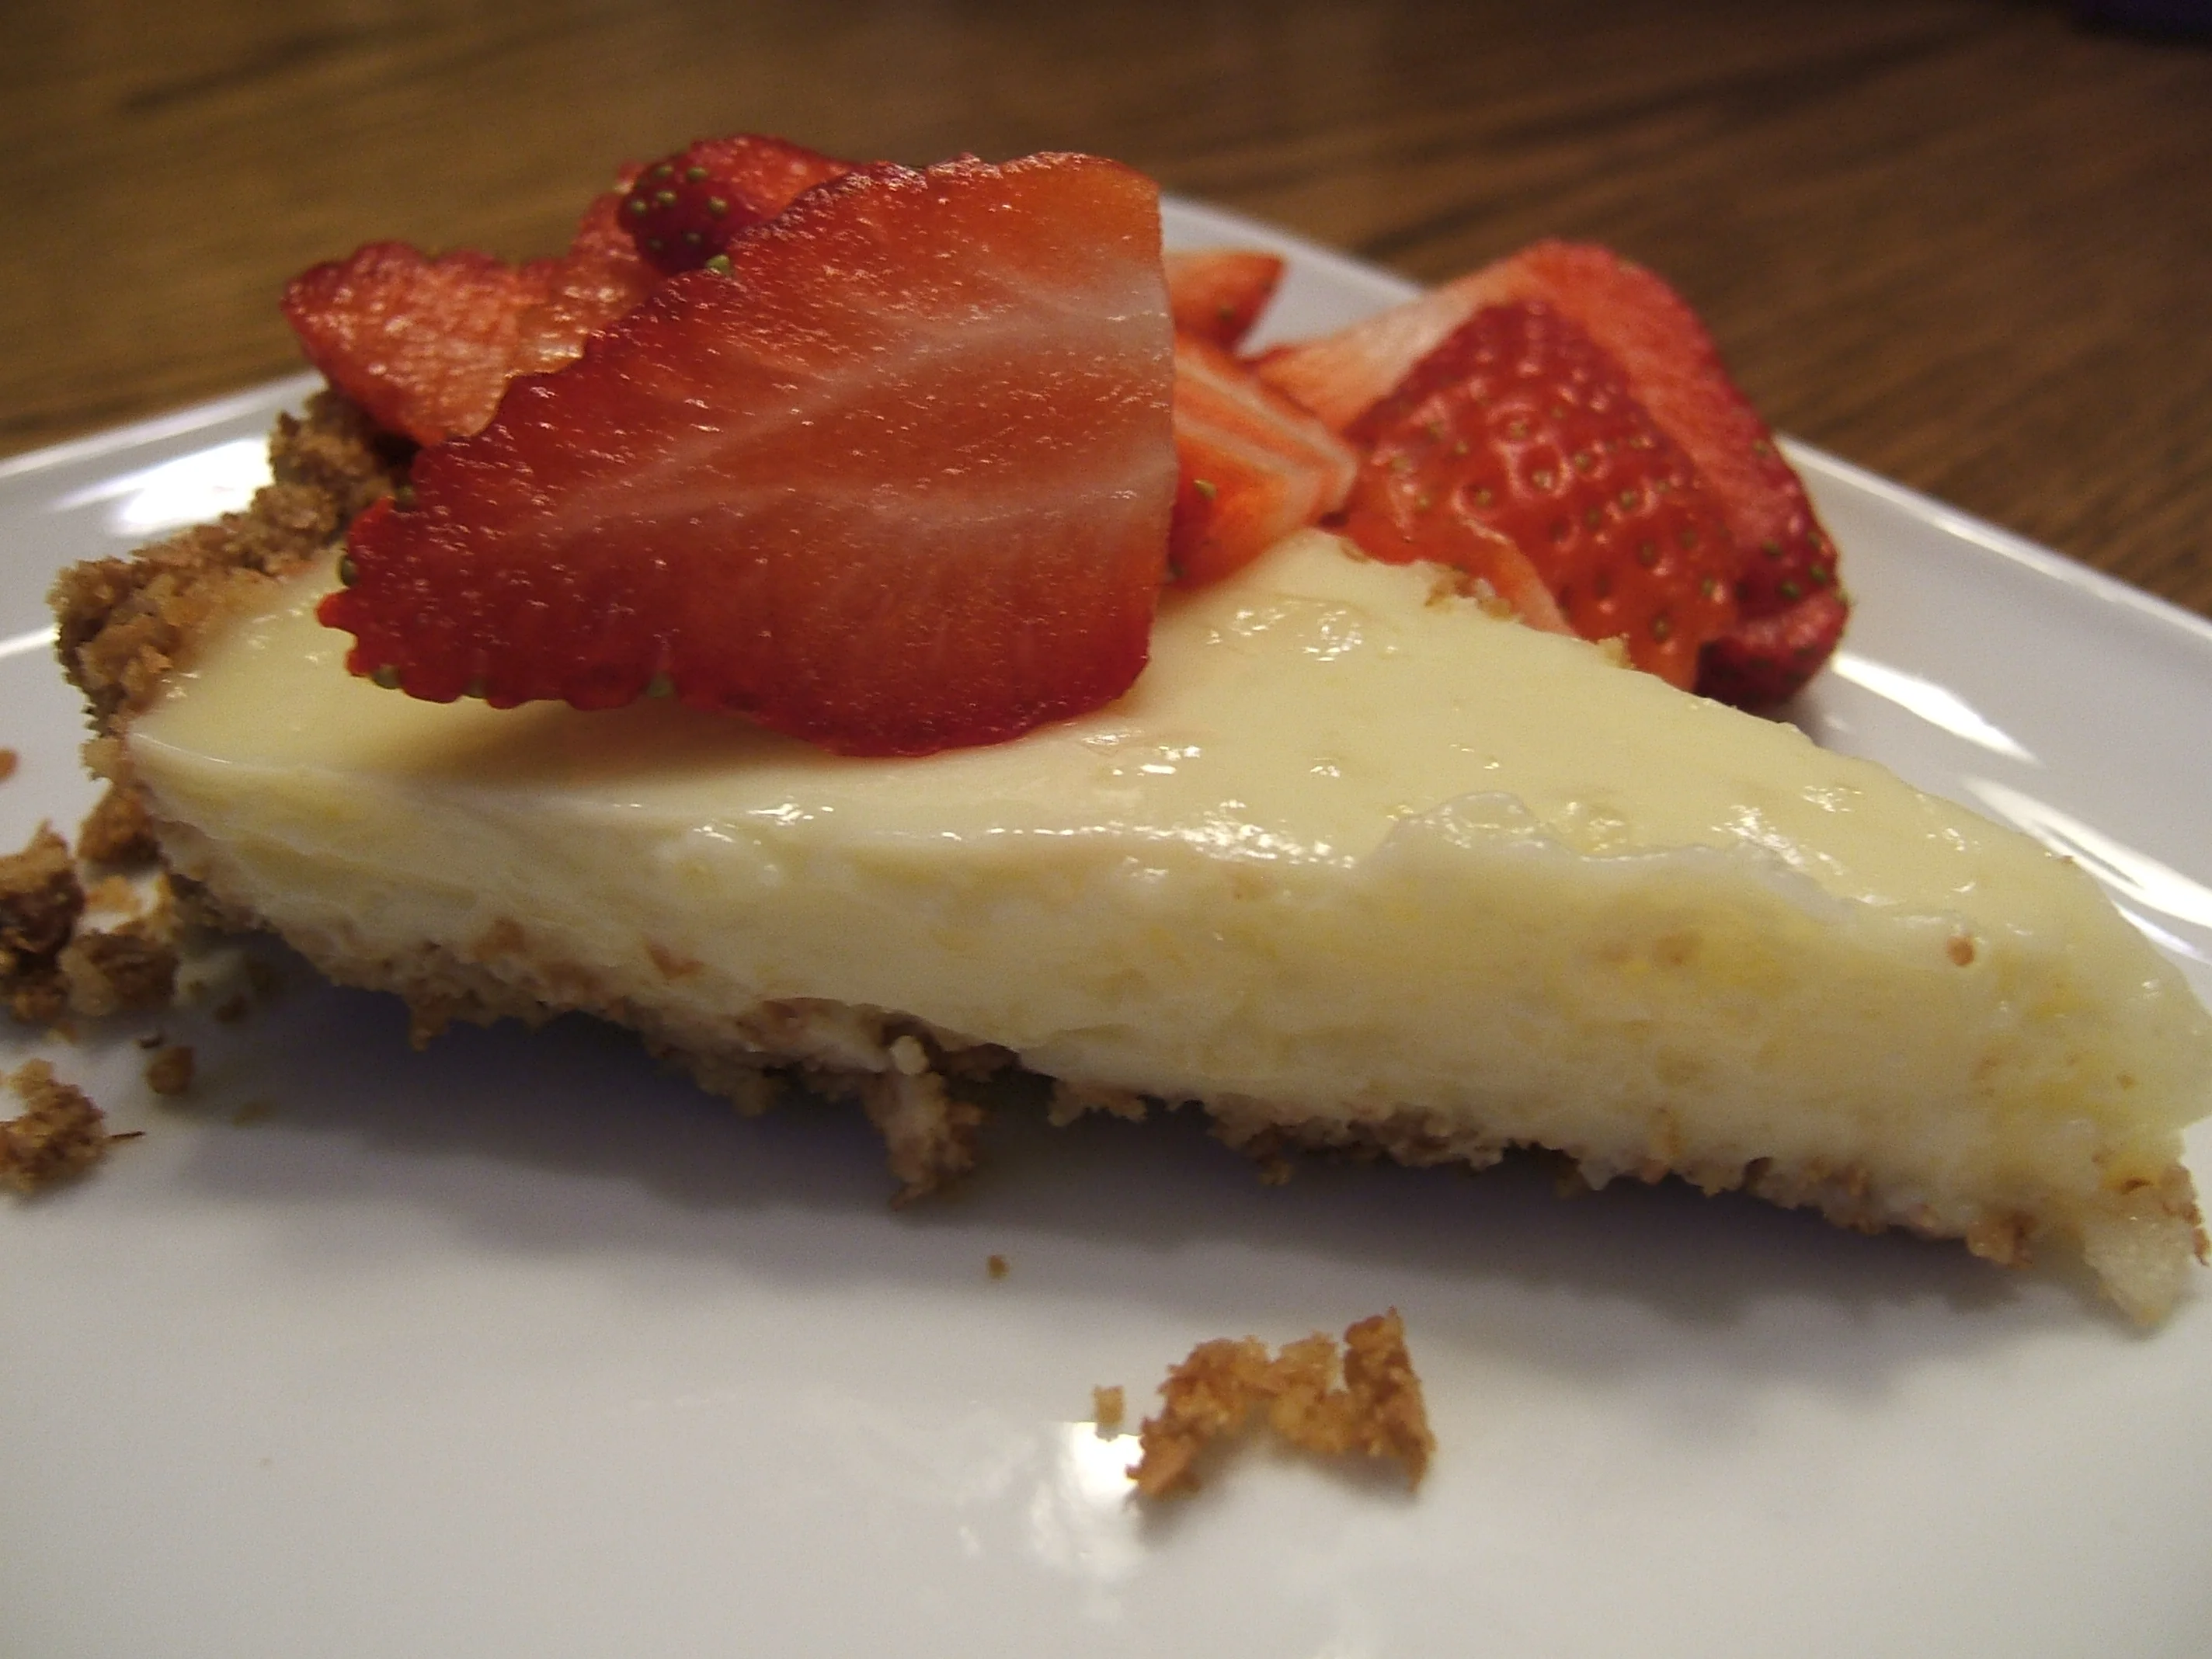 Tangy lemon custard pie with strawberry slices on top